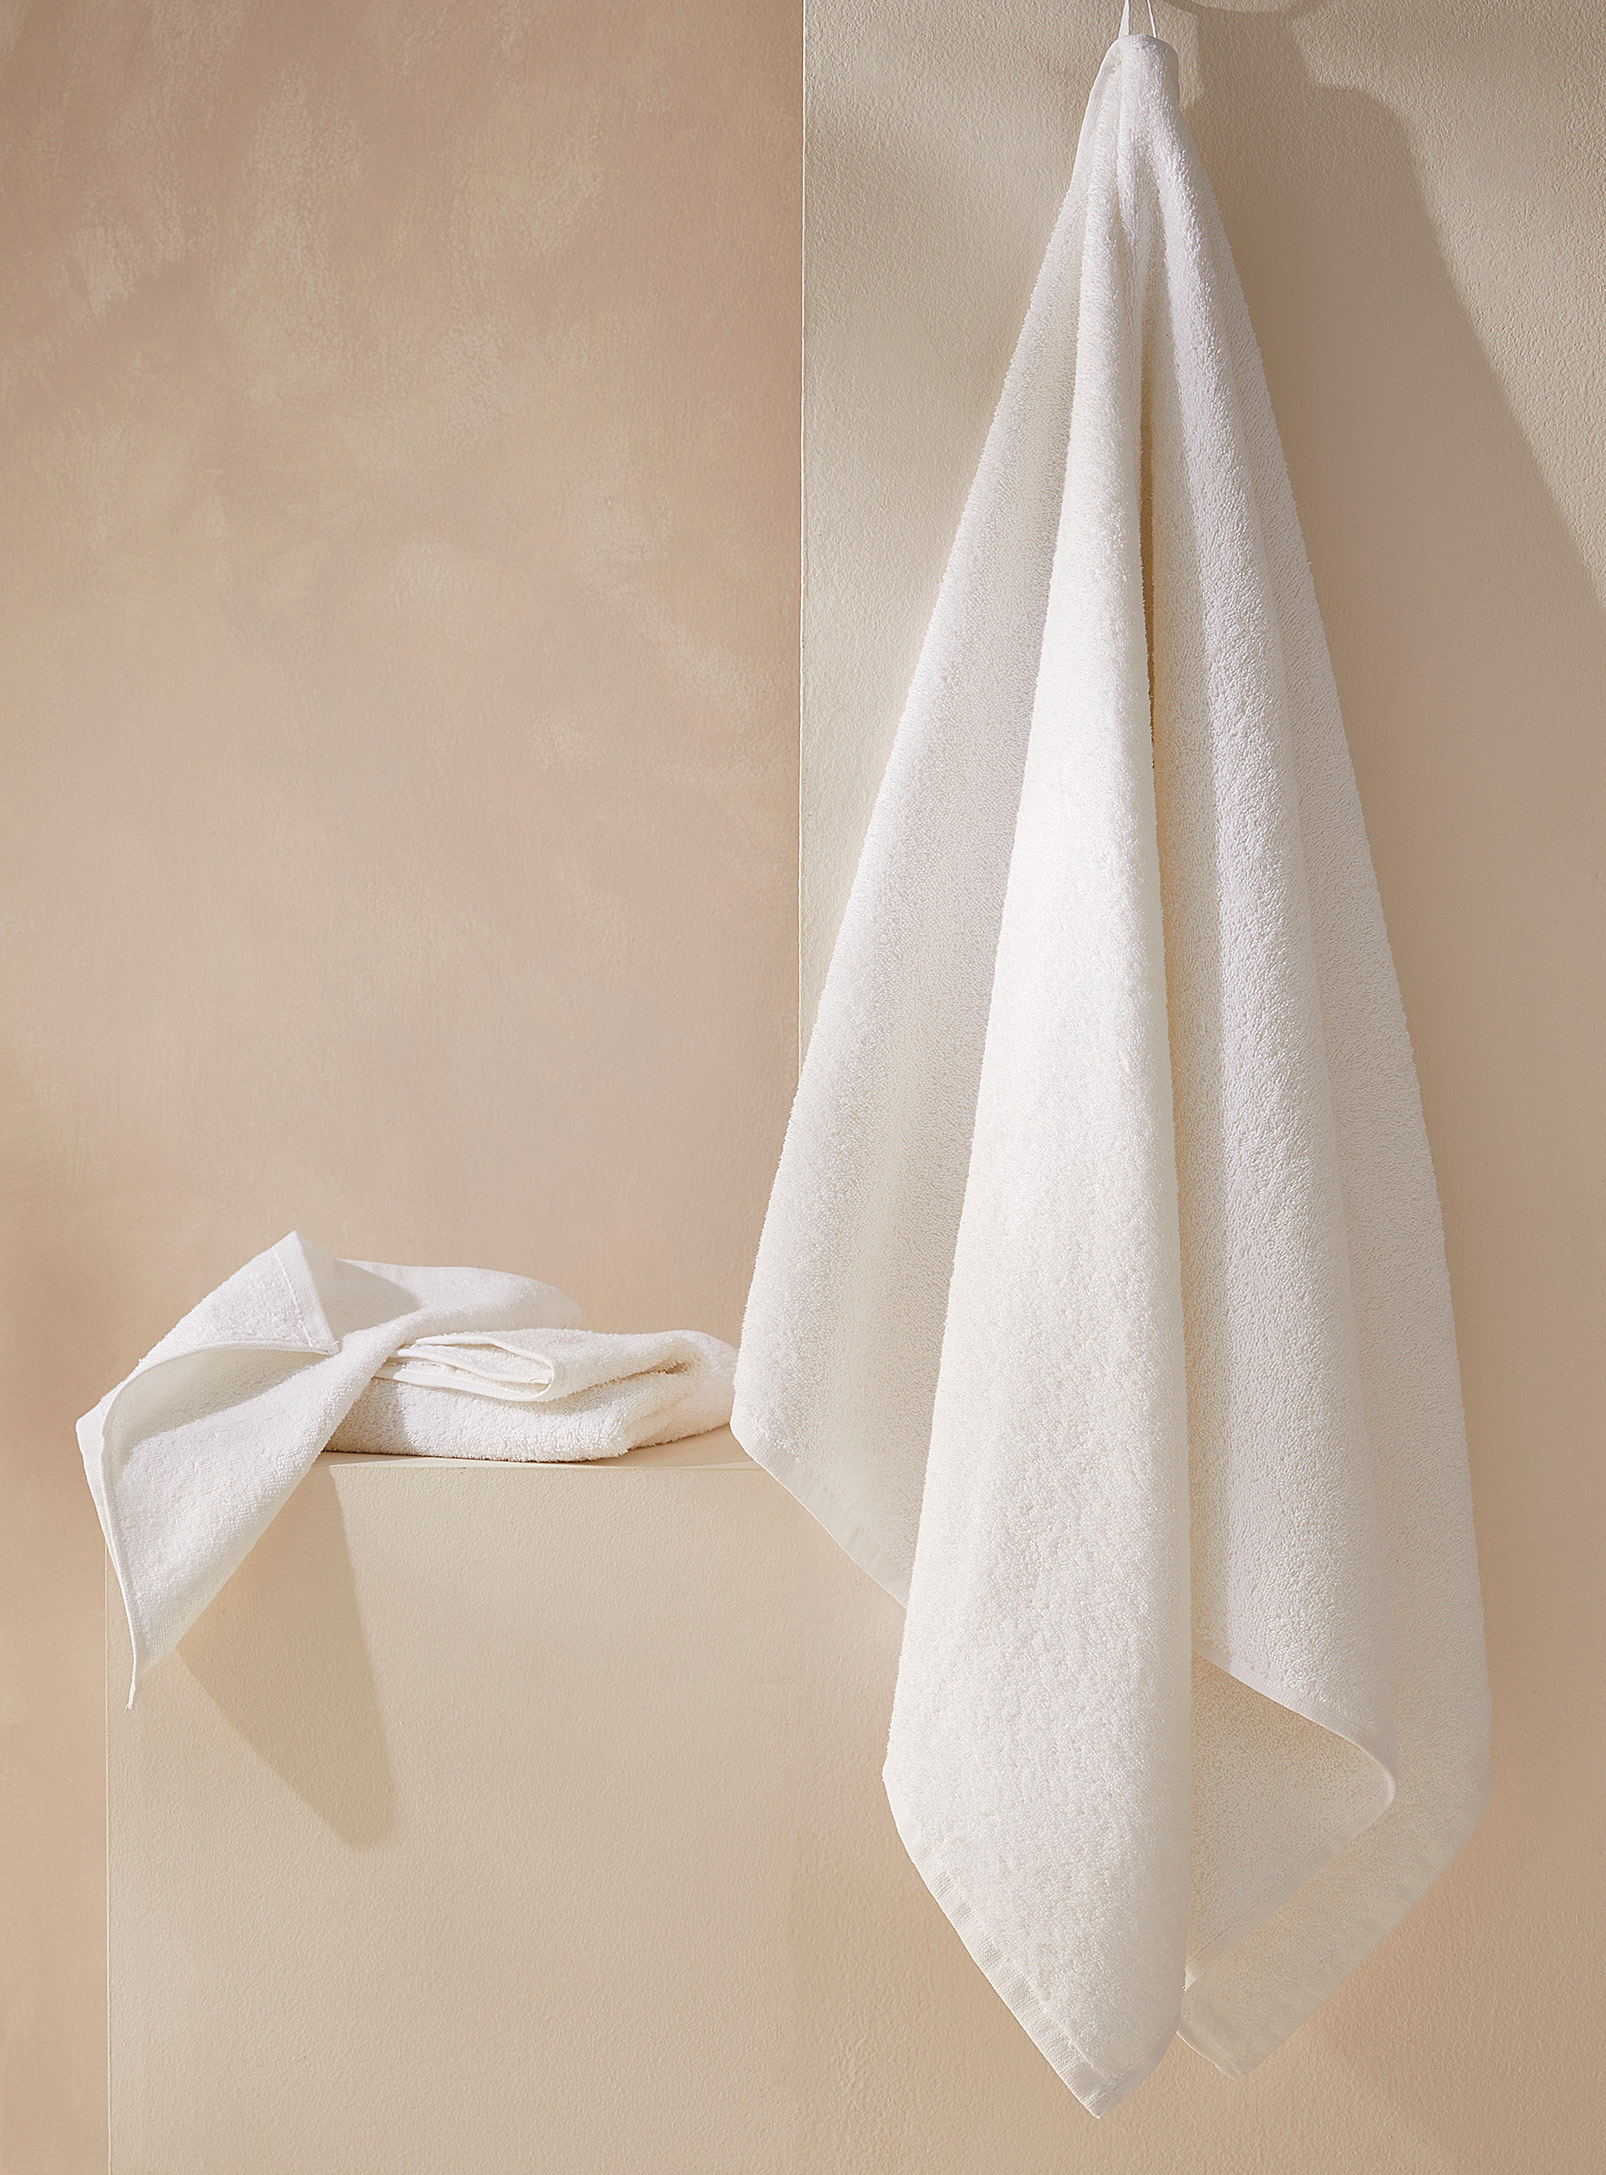 Simons Maison Quick-drying Daily Organic Cotton Towels Lightweight, Eco-friendly Fibre In White